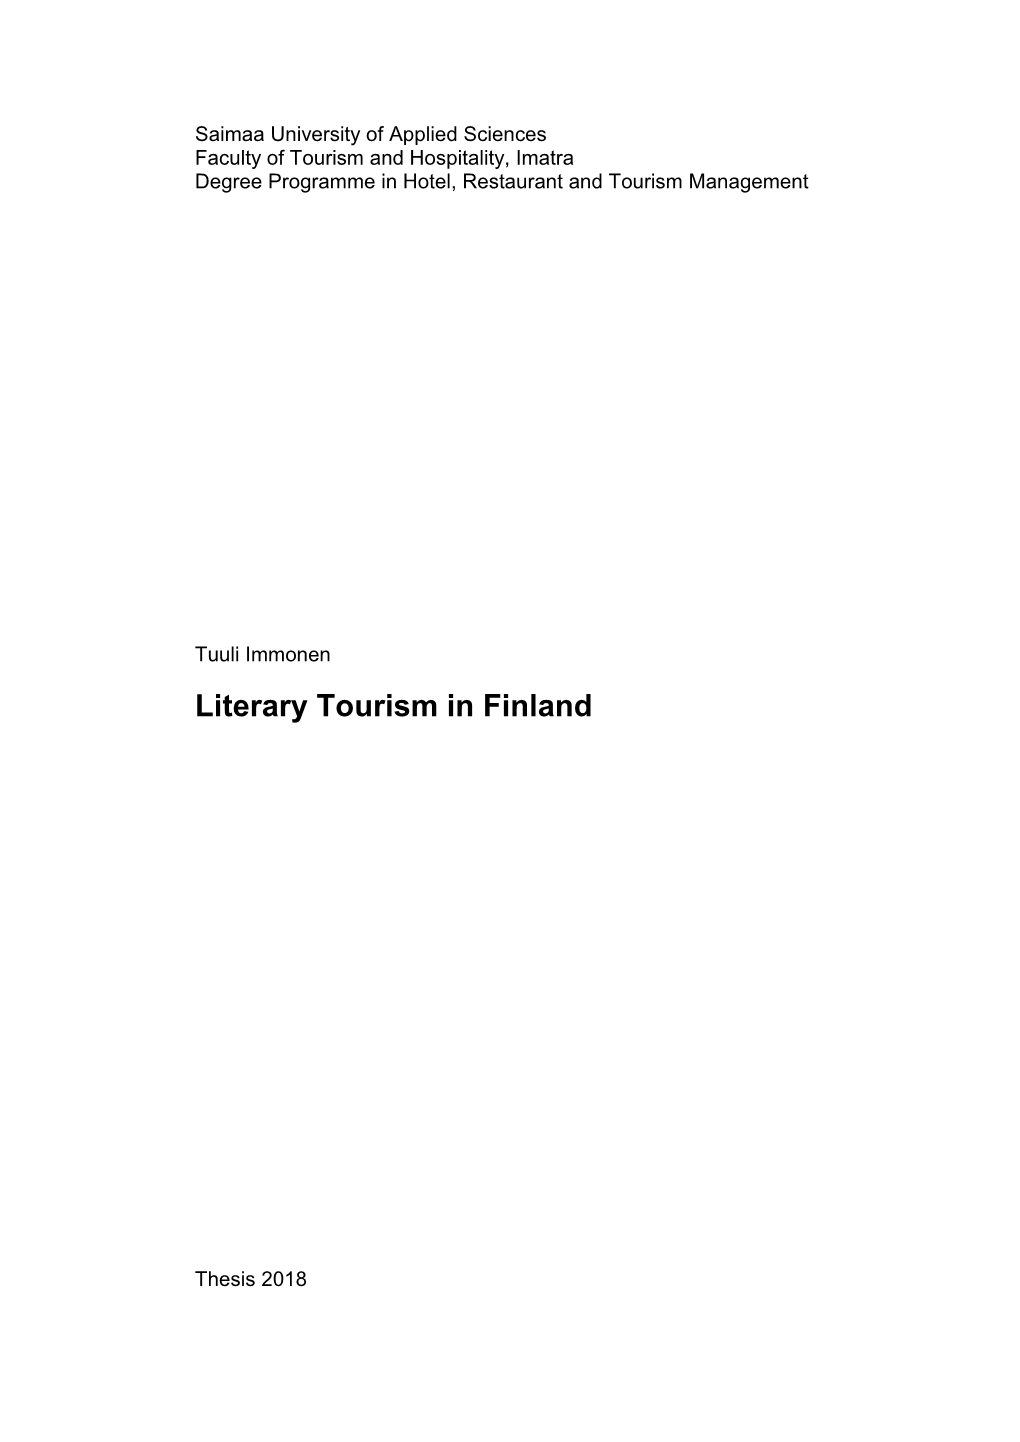 Literary Tourism in Finland